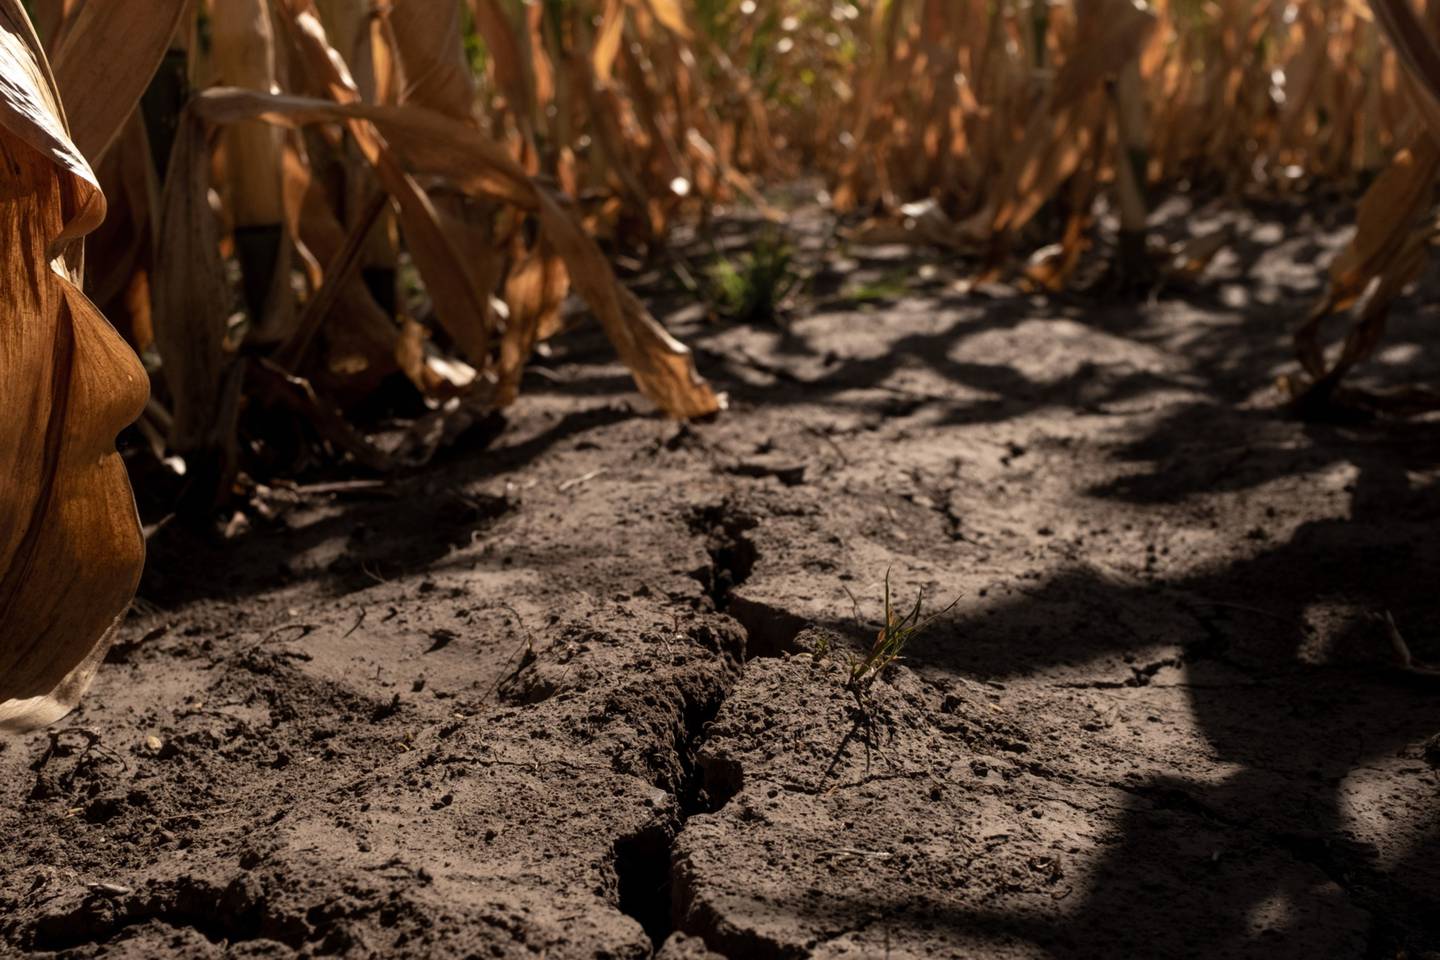 Cracked soil on a farm during a heat wave in San Antonio de Areco, Argentina, on Jan. 11, 2022.dfd